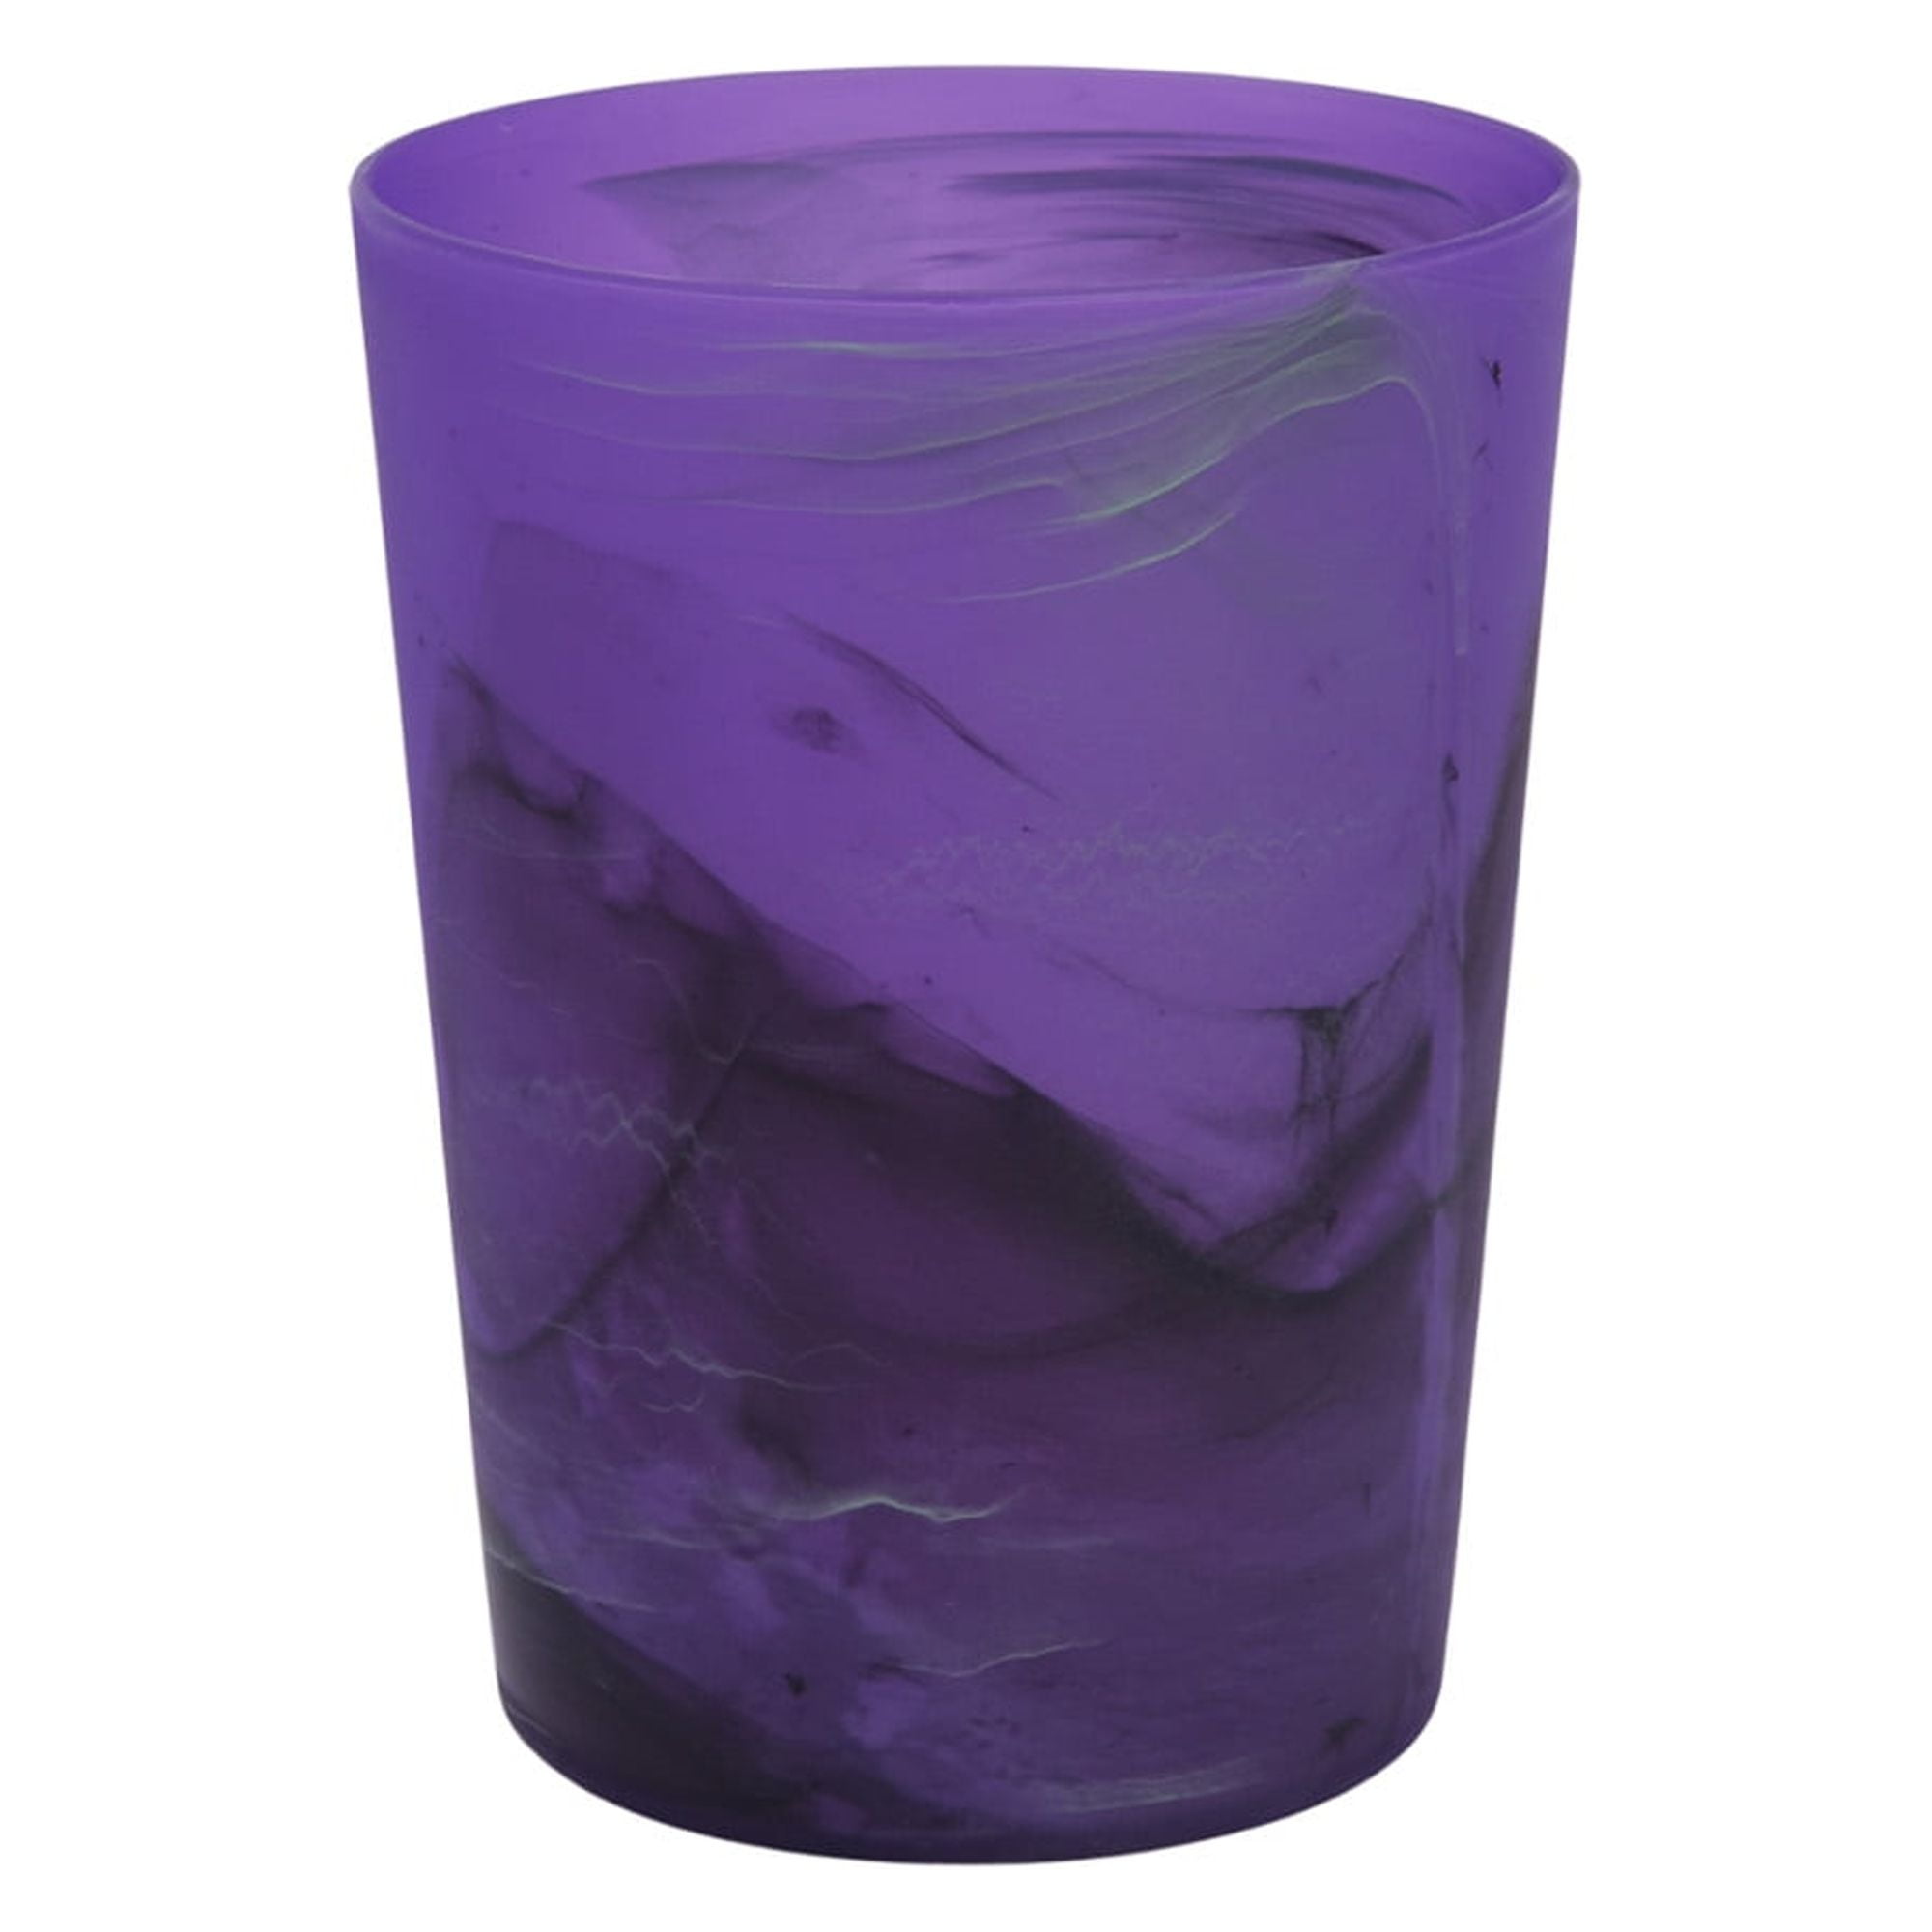 Kigai Plain Pastel Violet Solid Color Tumbler with Lid and Straw, Insulated  Stainless Steel Tumbler …See more Kigai Plain Pastel Violet Solid Color